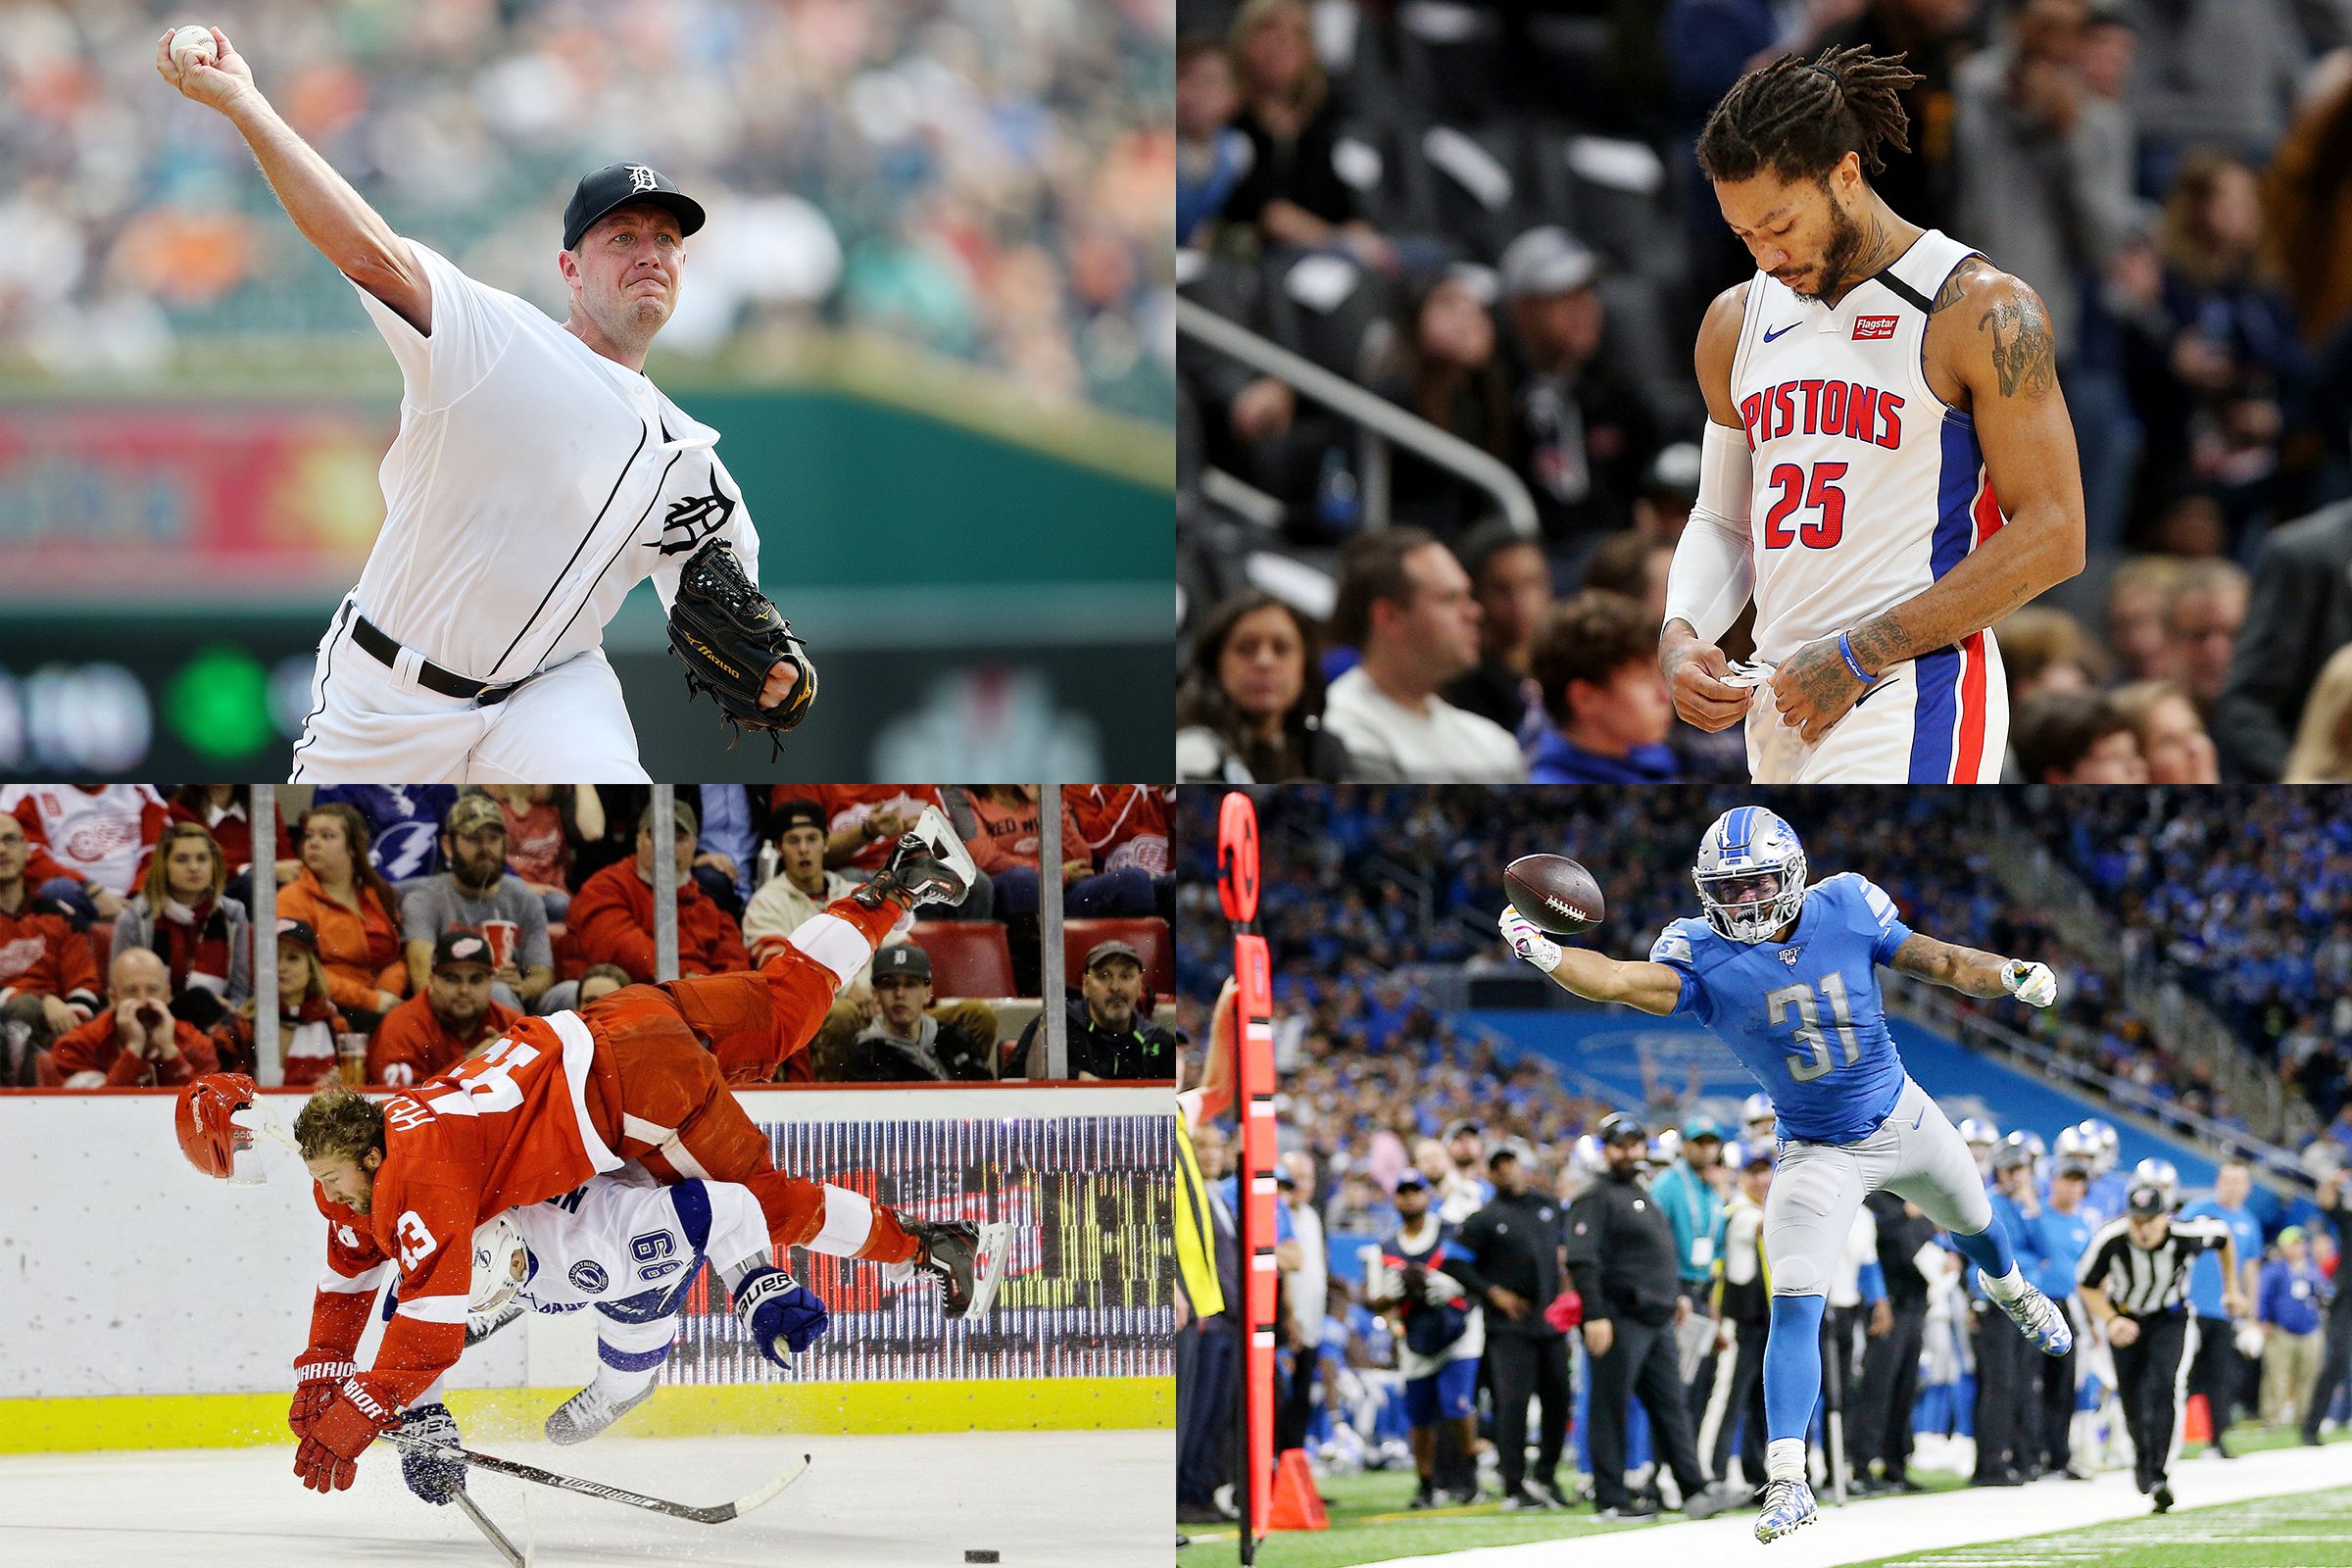 Detroit's Kryptonite: Tigers have company in the Lions, Red Wings and  Pistons when it comes to long losing streaks against certain foes 